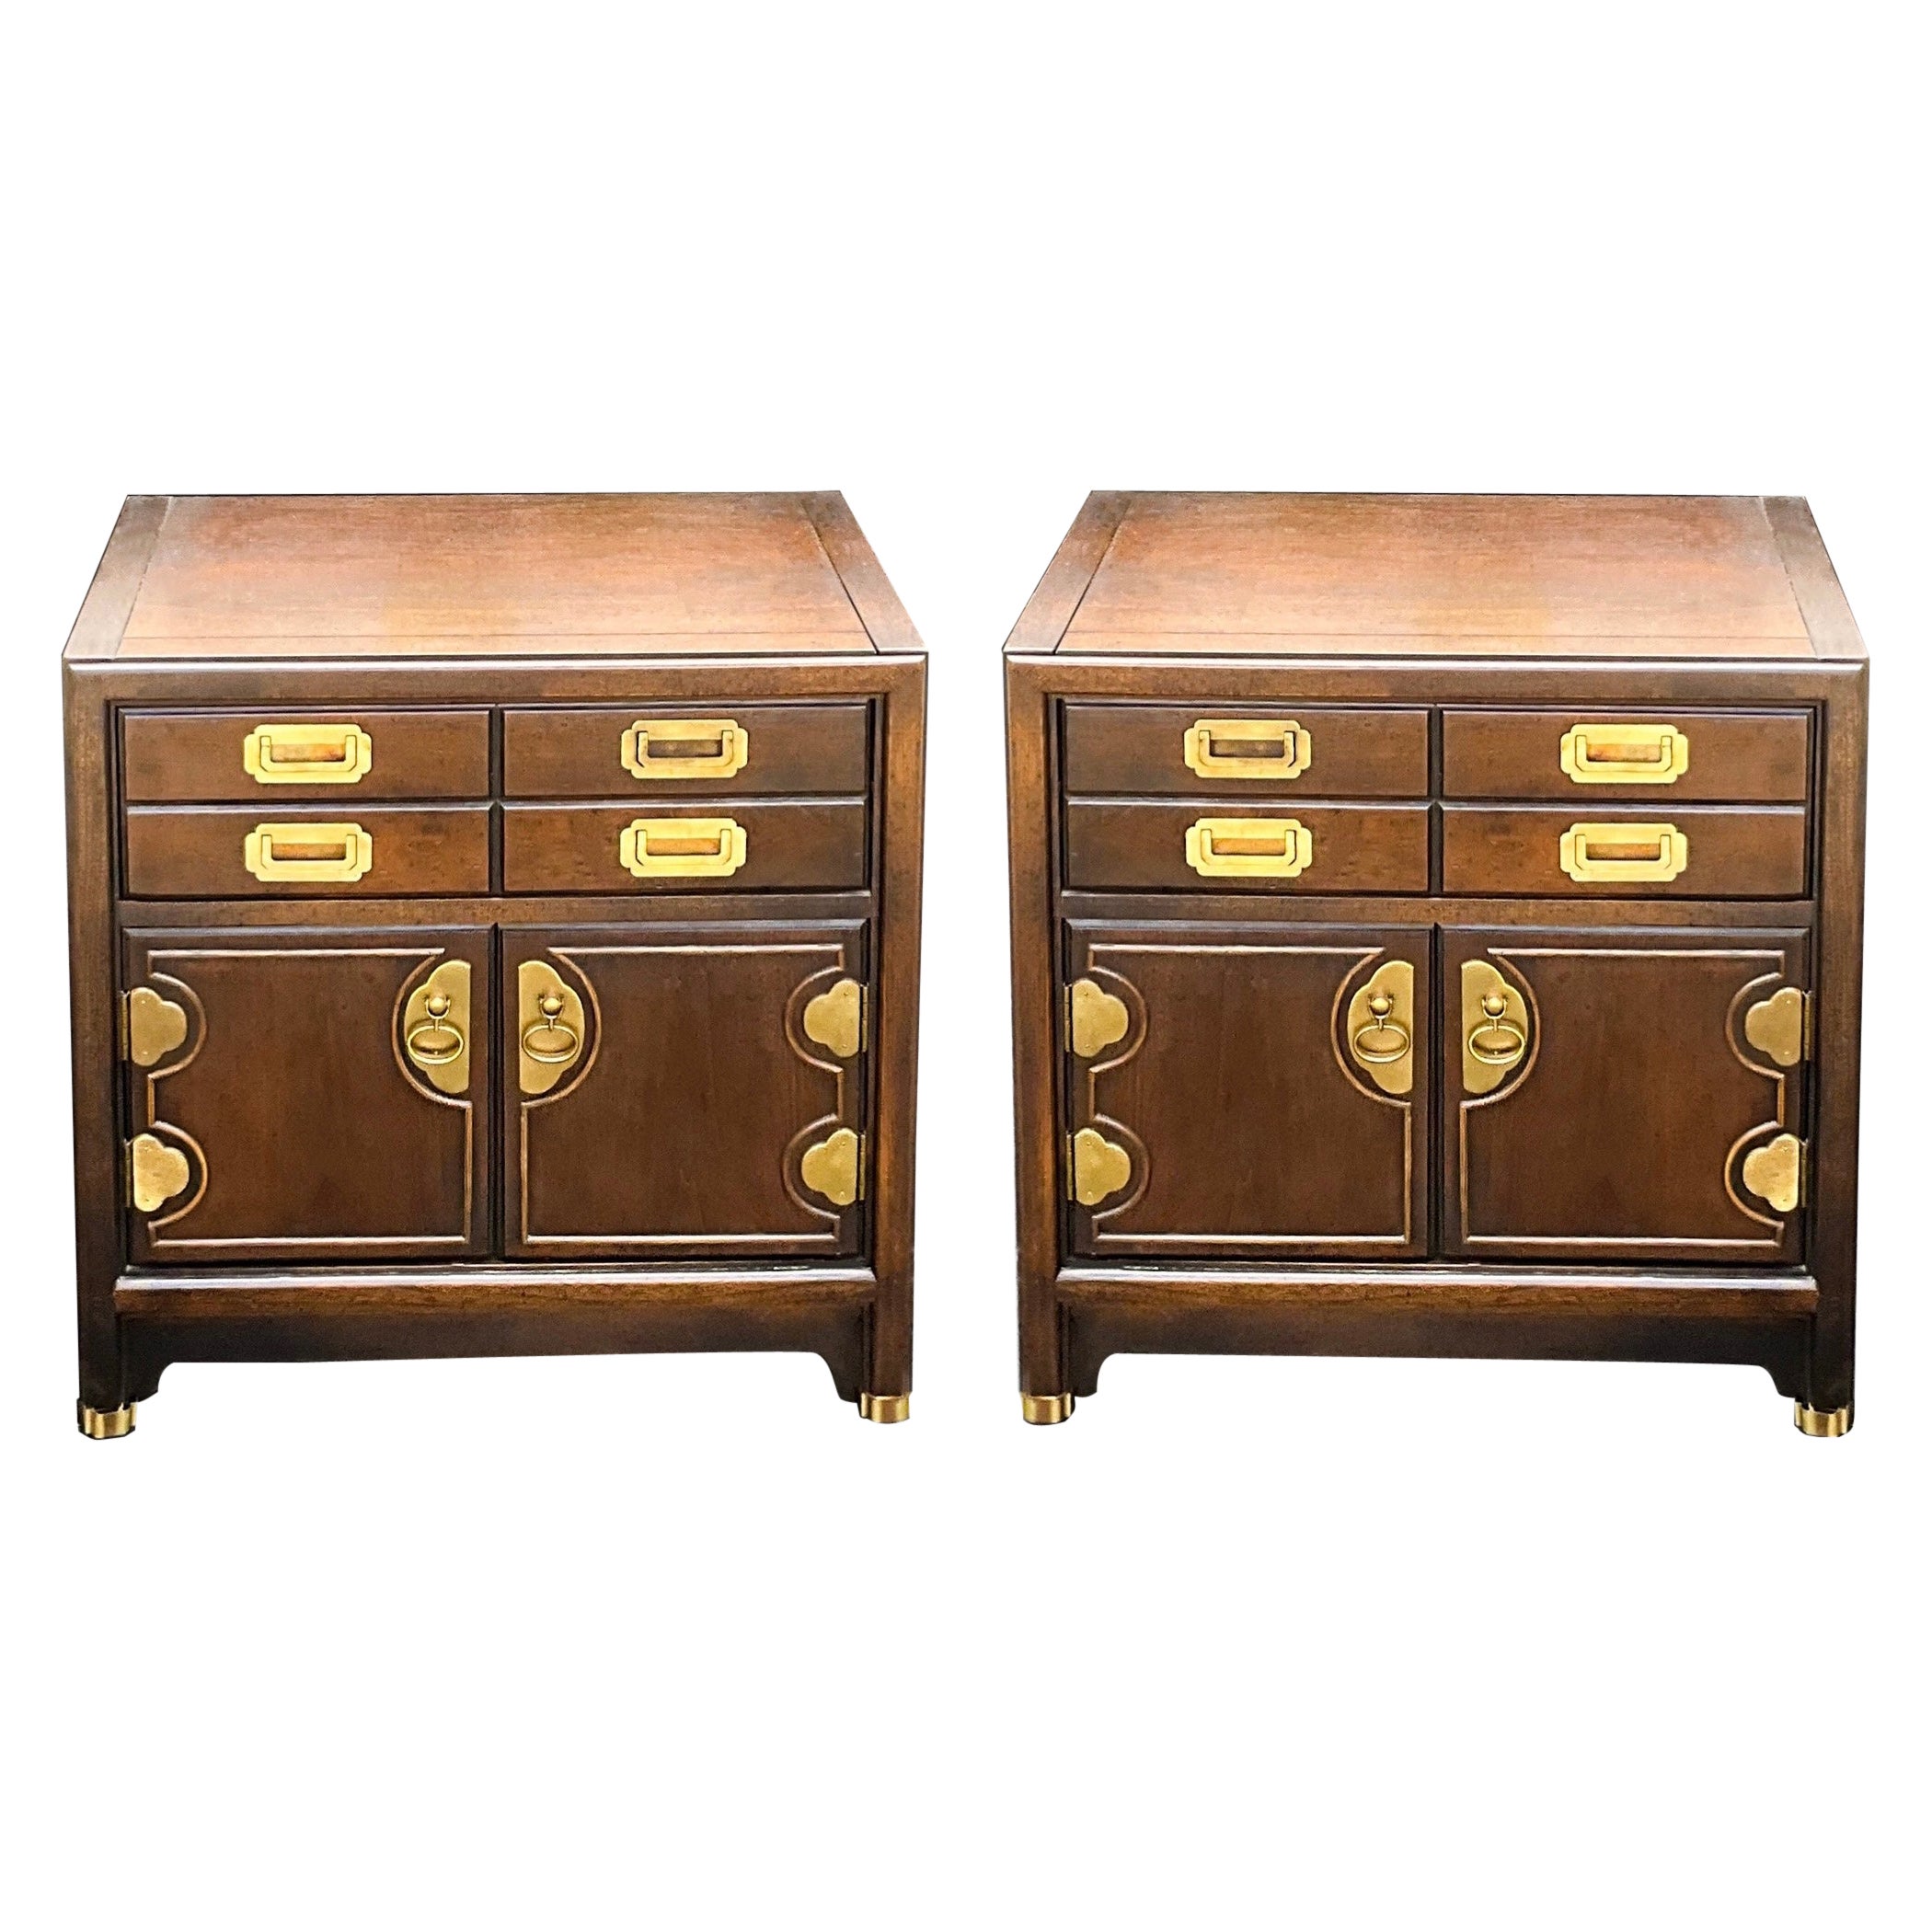 Mid-Century Campaign Style Brass & Fruitwood Side Tables / Chests - Pair